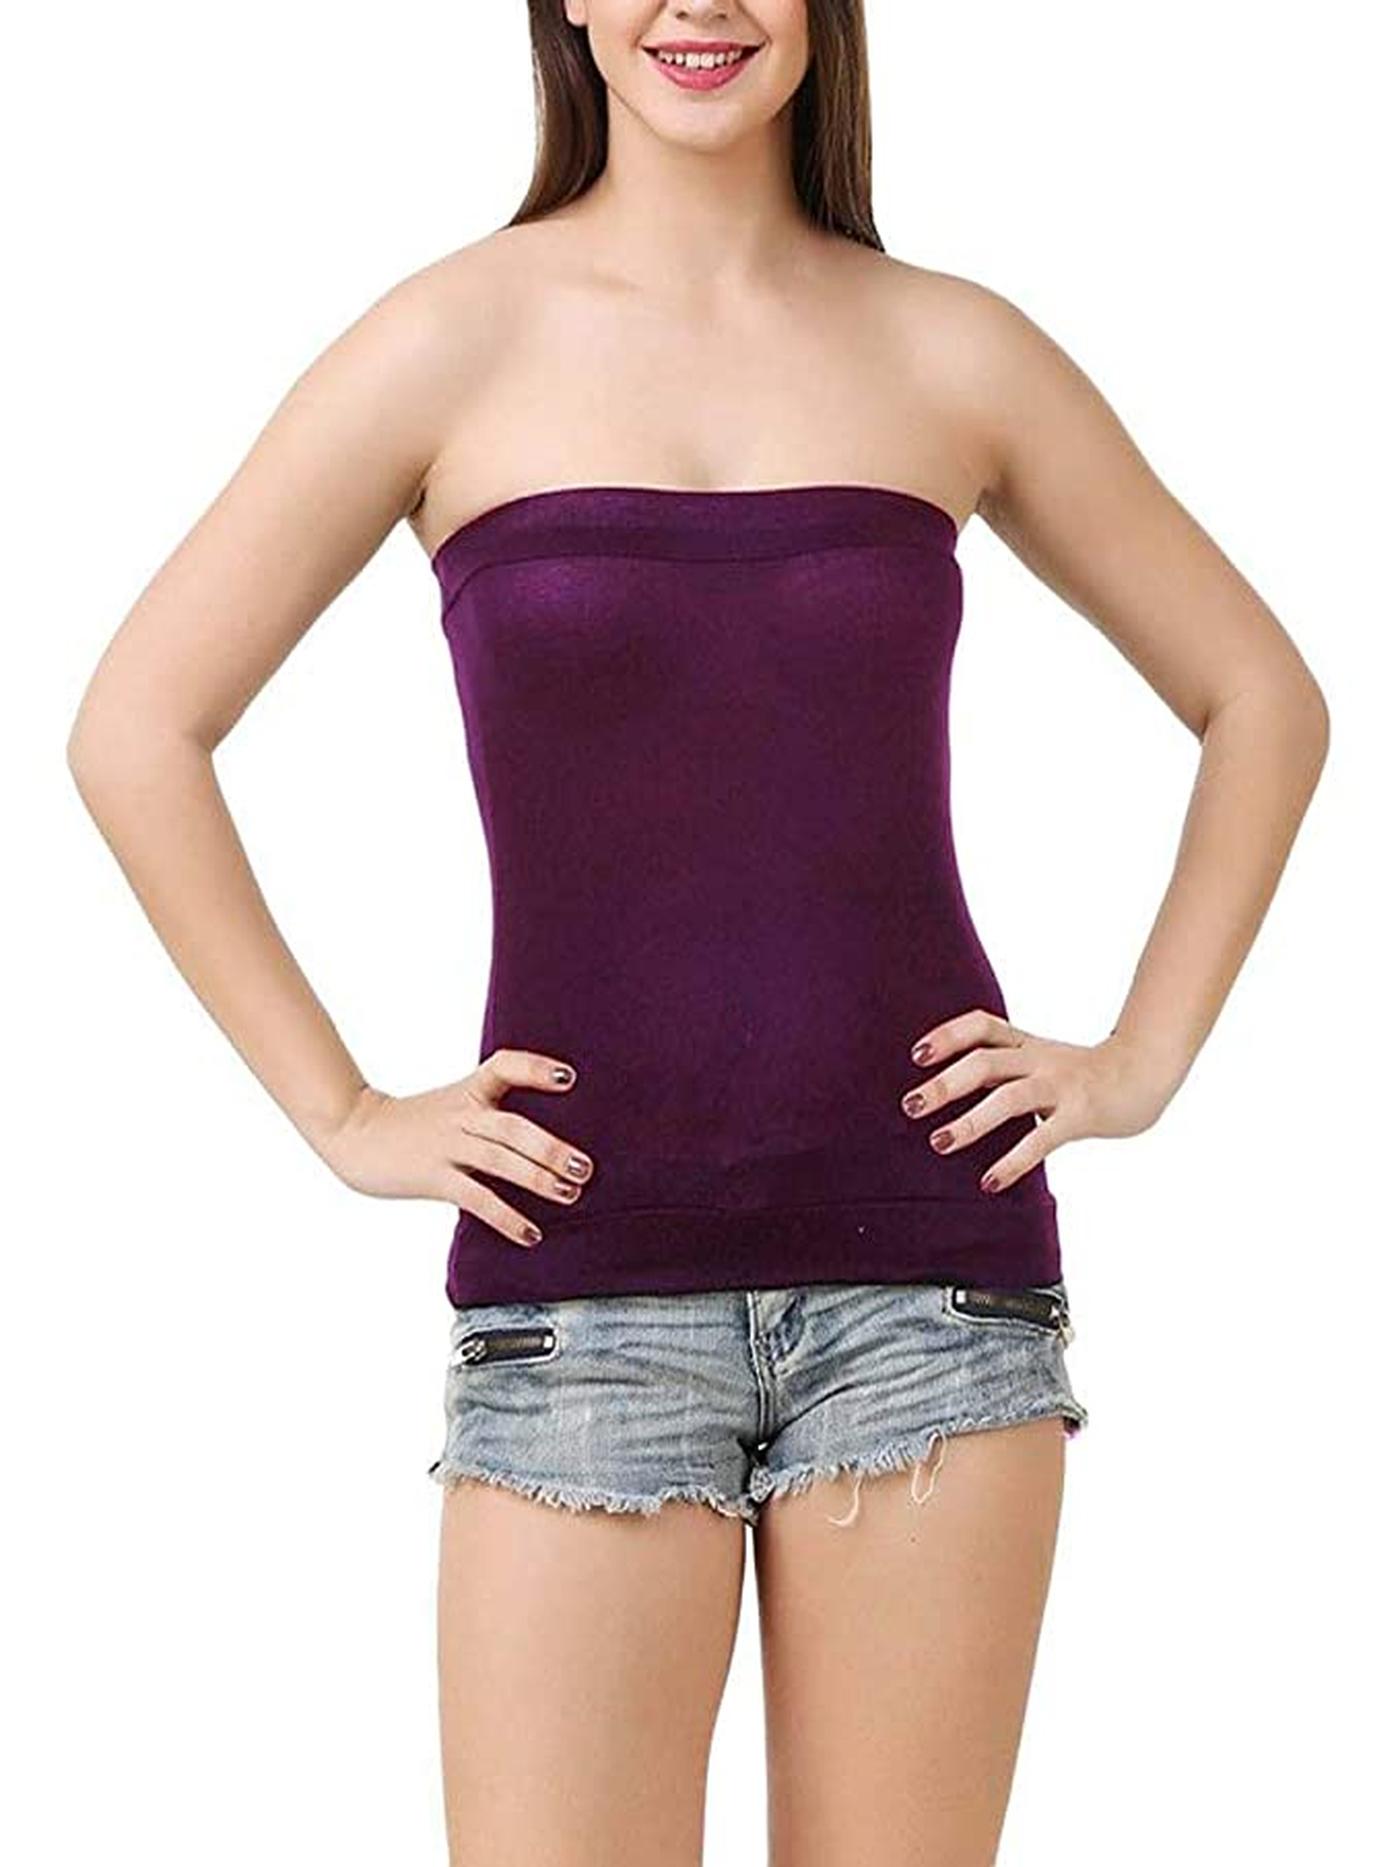 Strapless Stretchable Camisole Bandeau For Women & Girl (Free Size : 28-36)  Pink Color Inner Tube Top